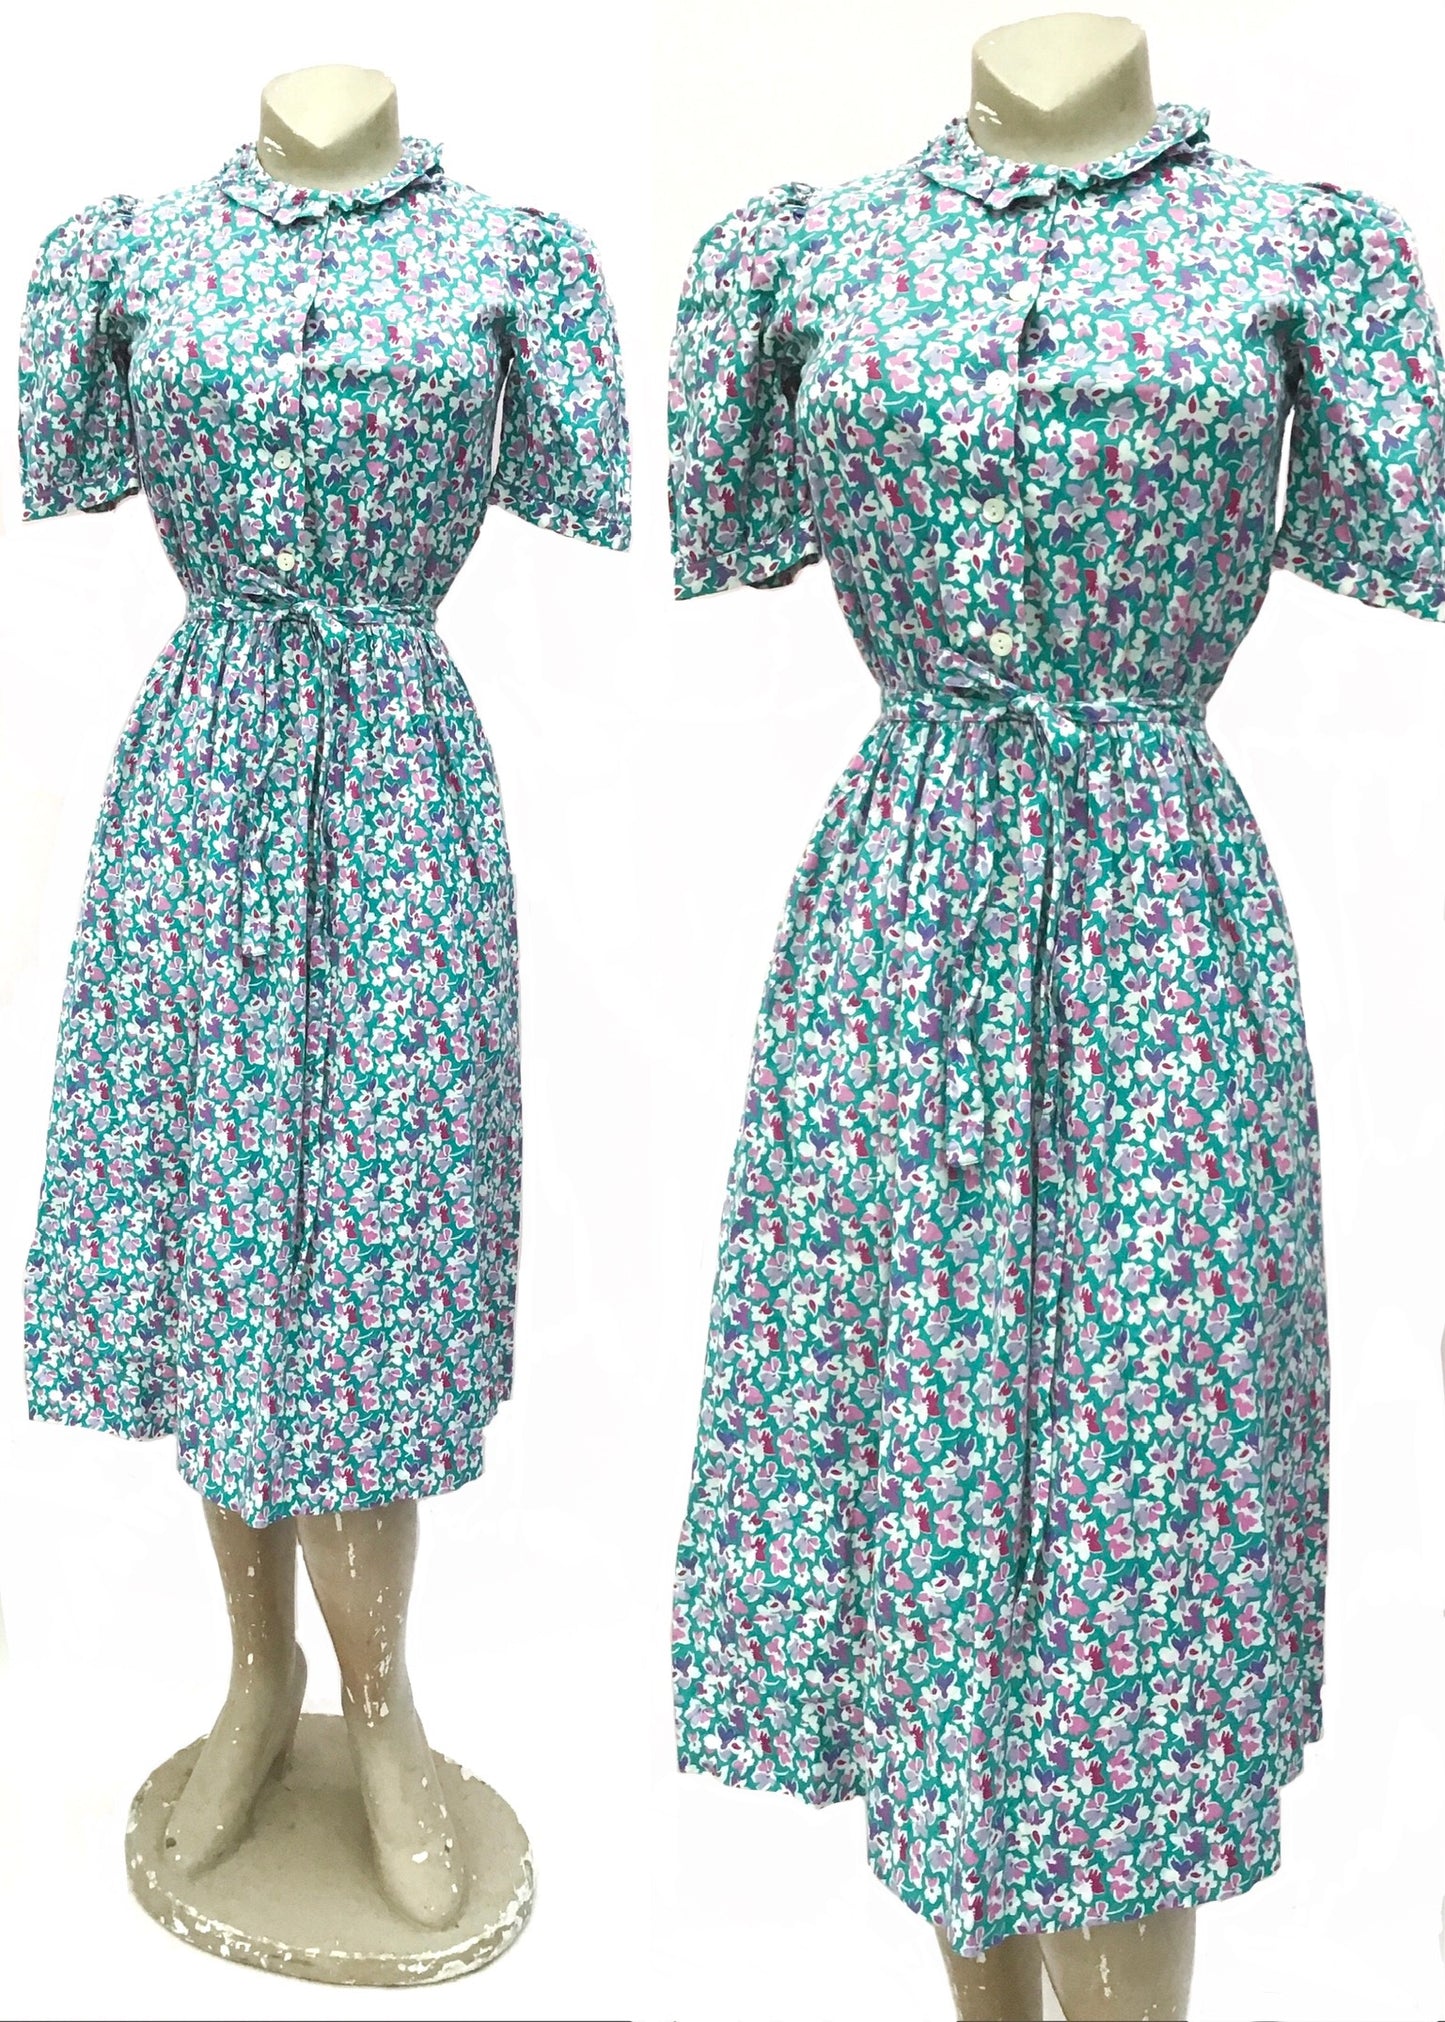 1940s style vintage 70s turquoise and lilac cotton sundress with short puffed sleeves and cinched waist. With pretty violet flowers and pansies.